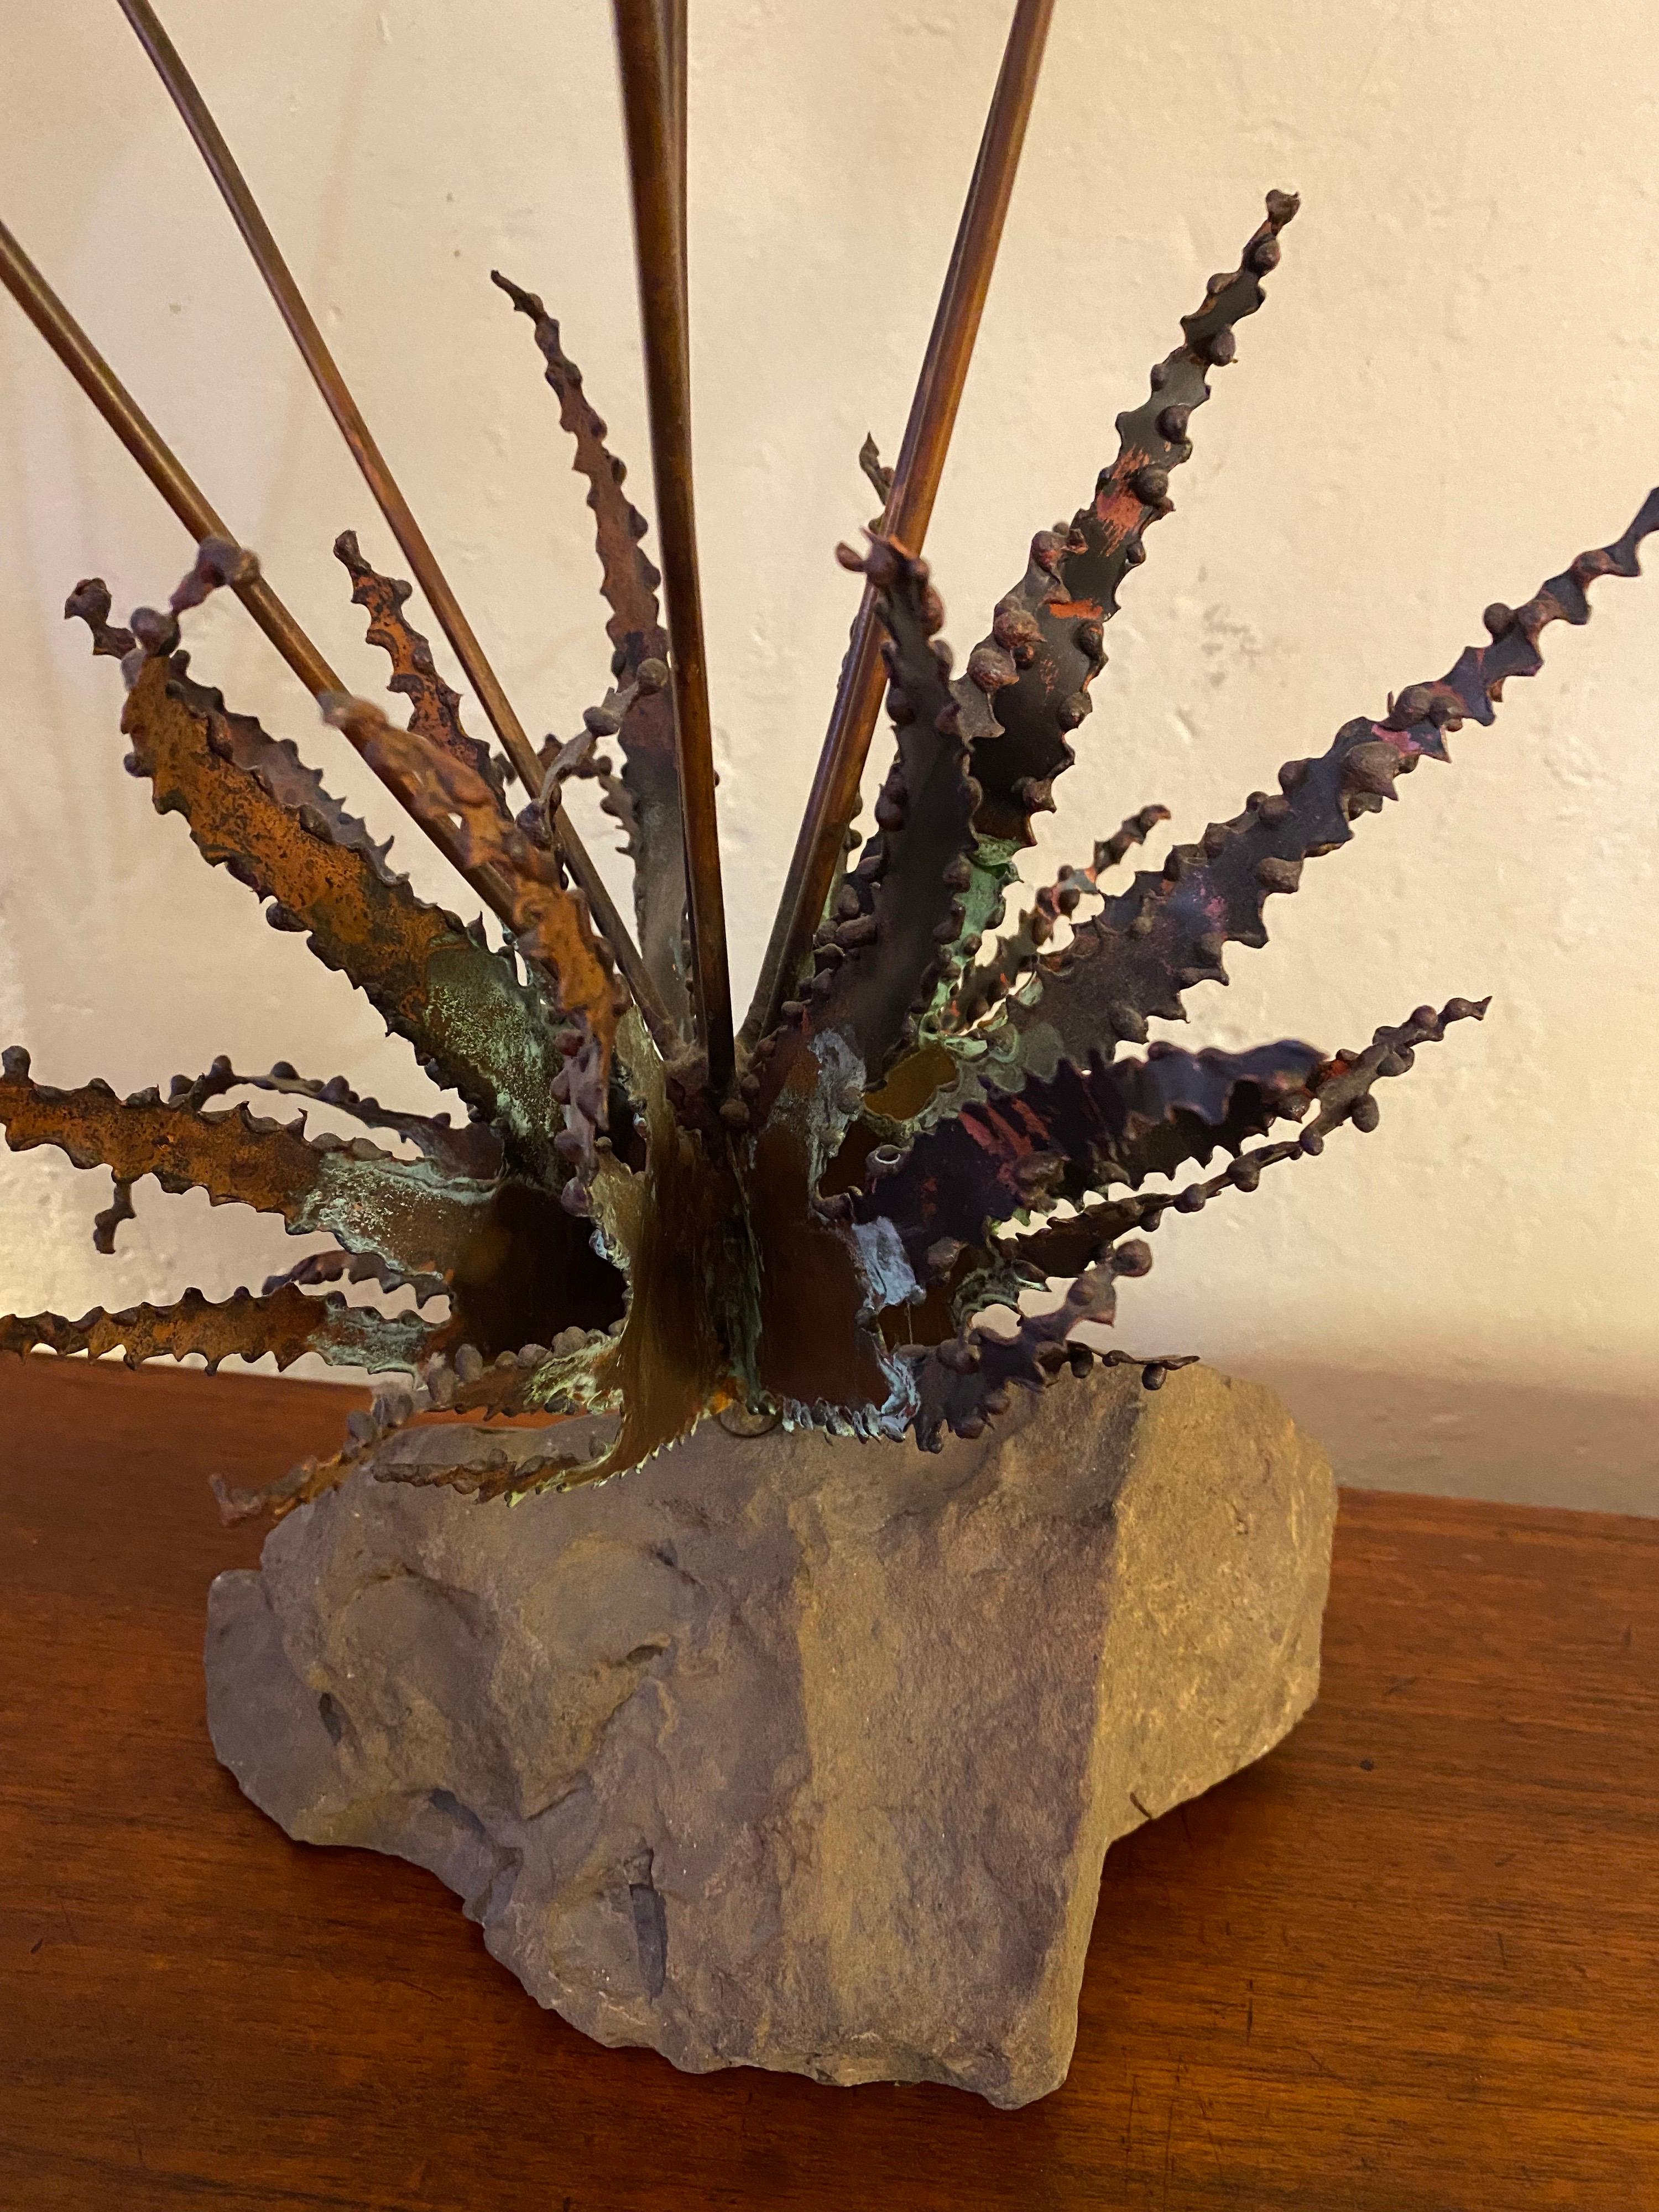 John Steck copper and stone Desert floral sculpture would complement any mid-century modern credenza or dresser.